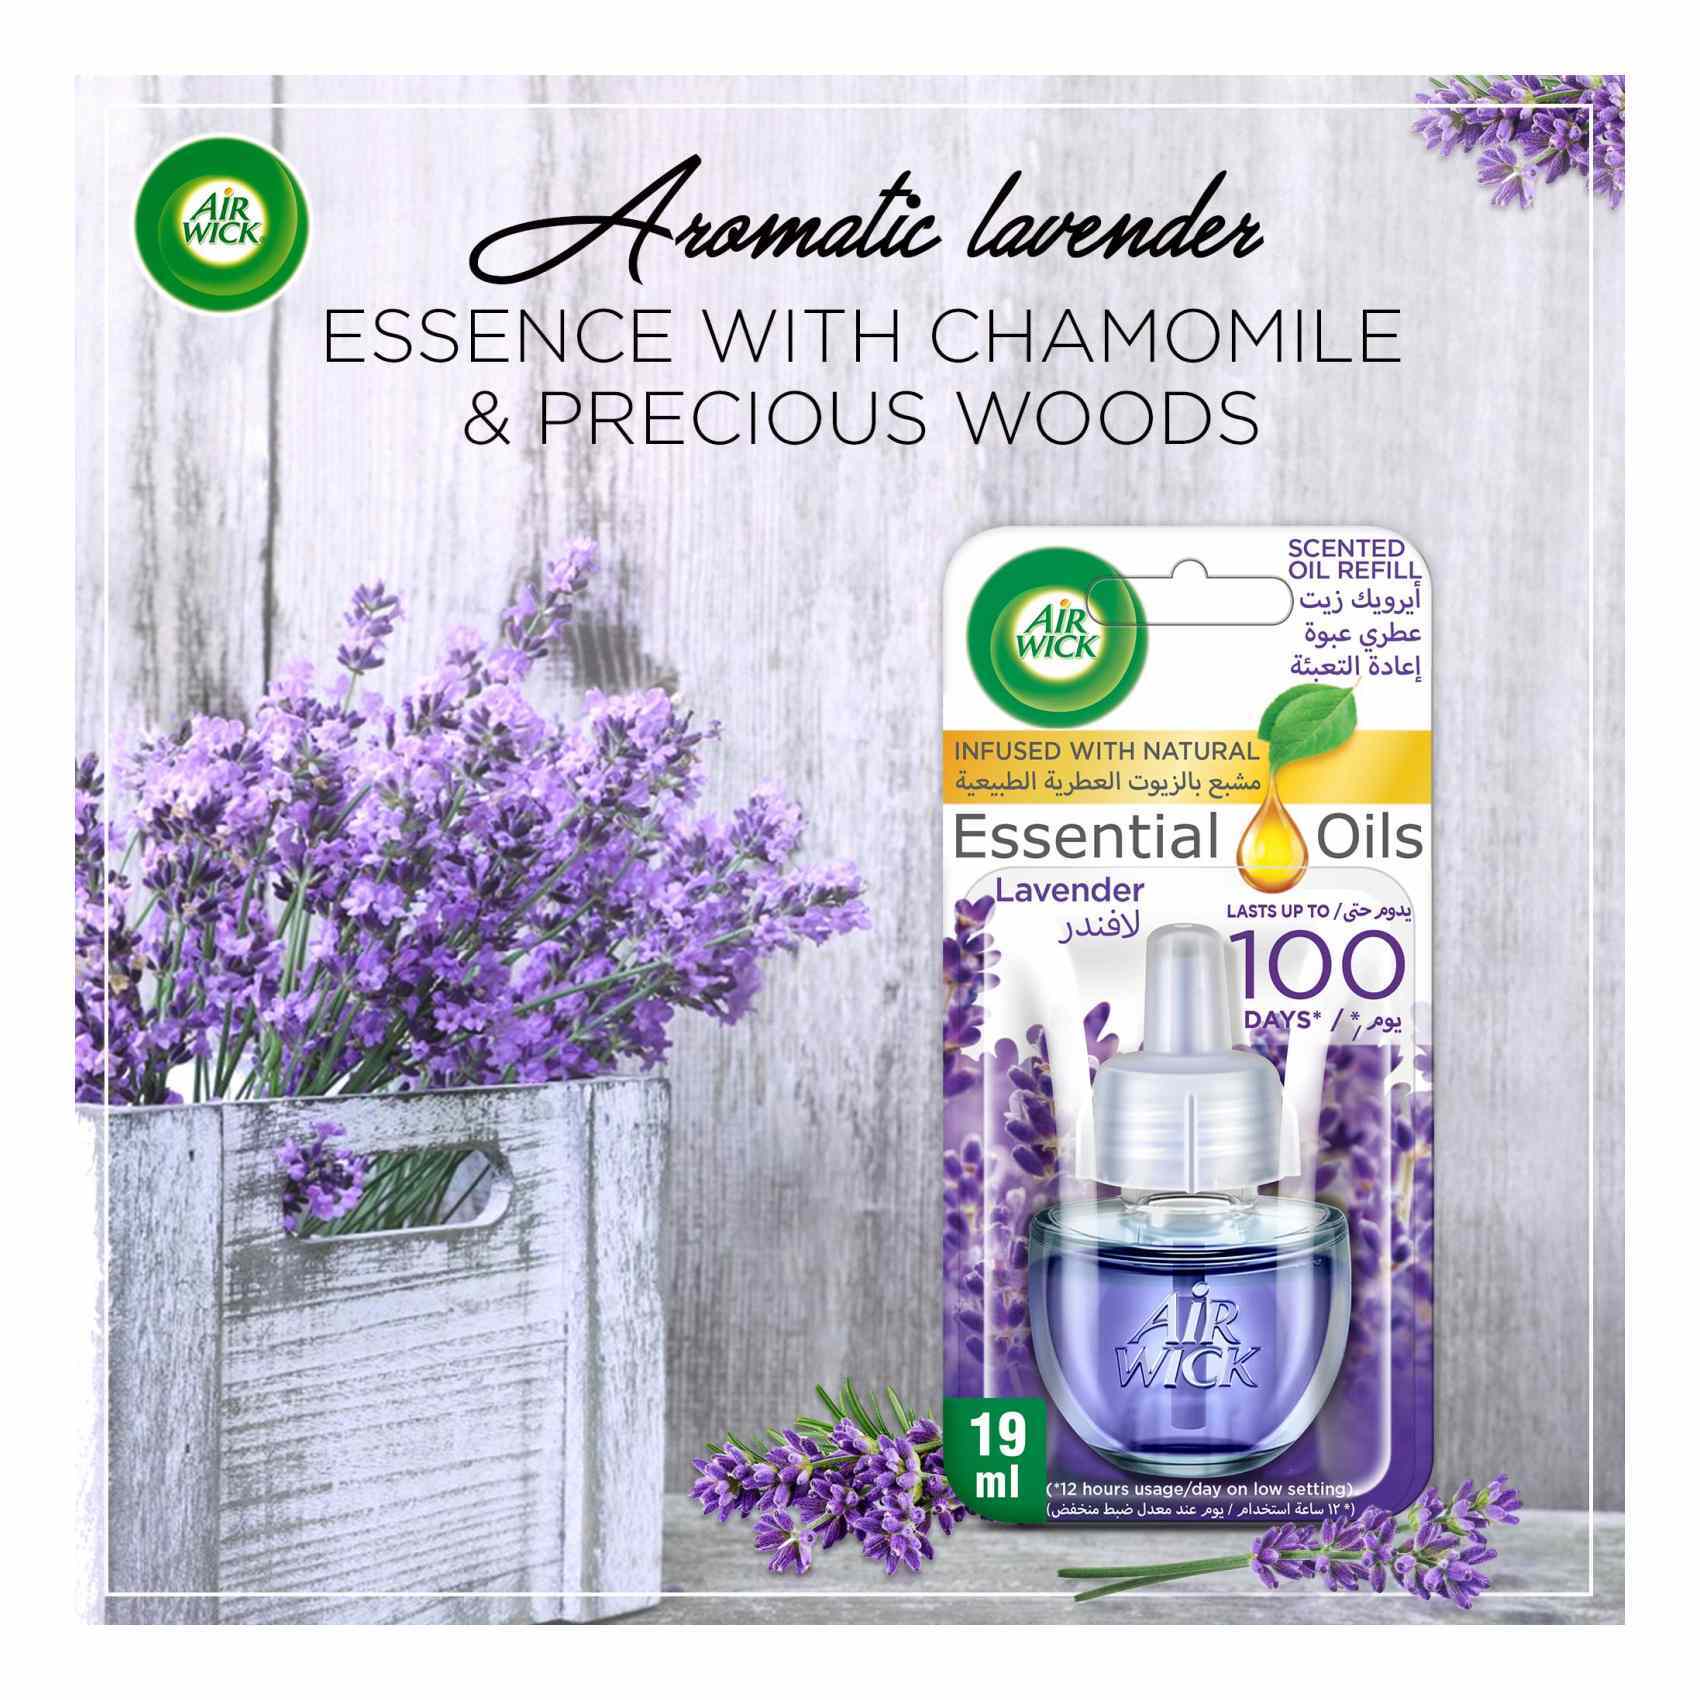 Air Wick Plug in Scented Oil Refill Lavender and Chamomile Air Freshener  Essential Oils, 2 ct - Harris Teeter